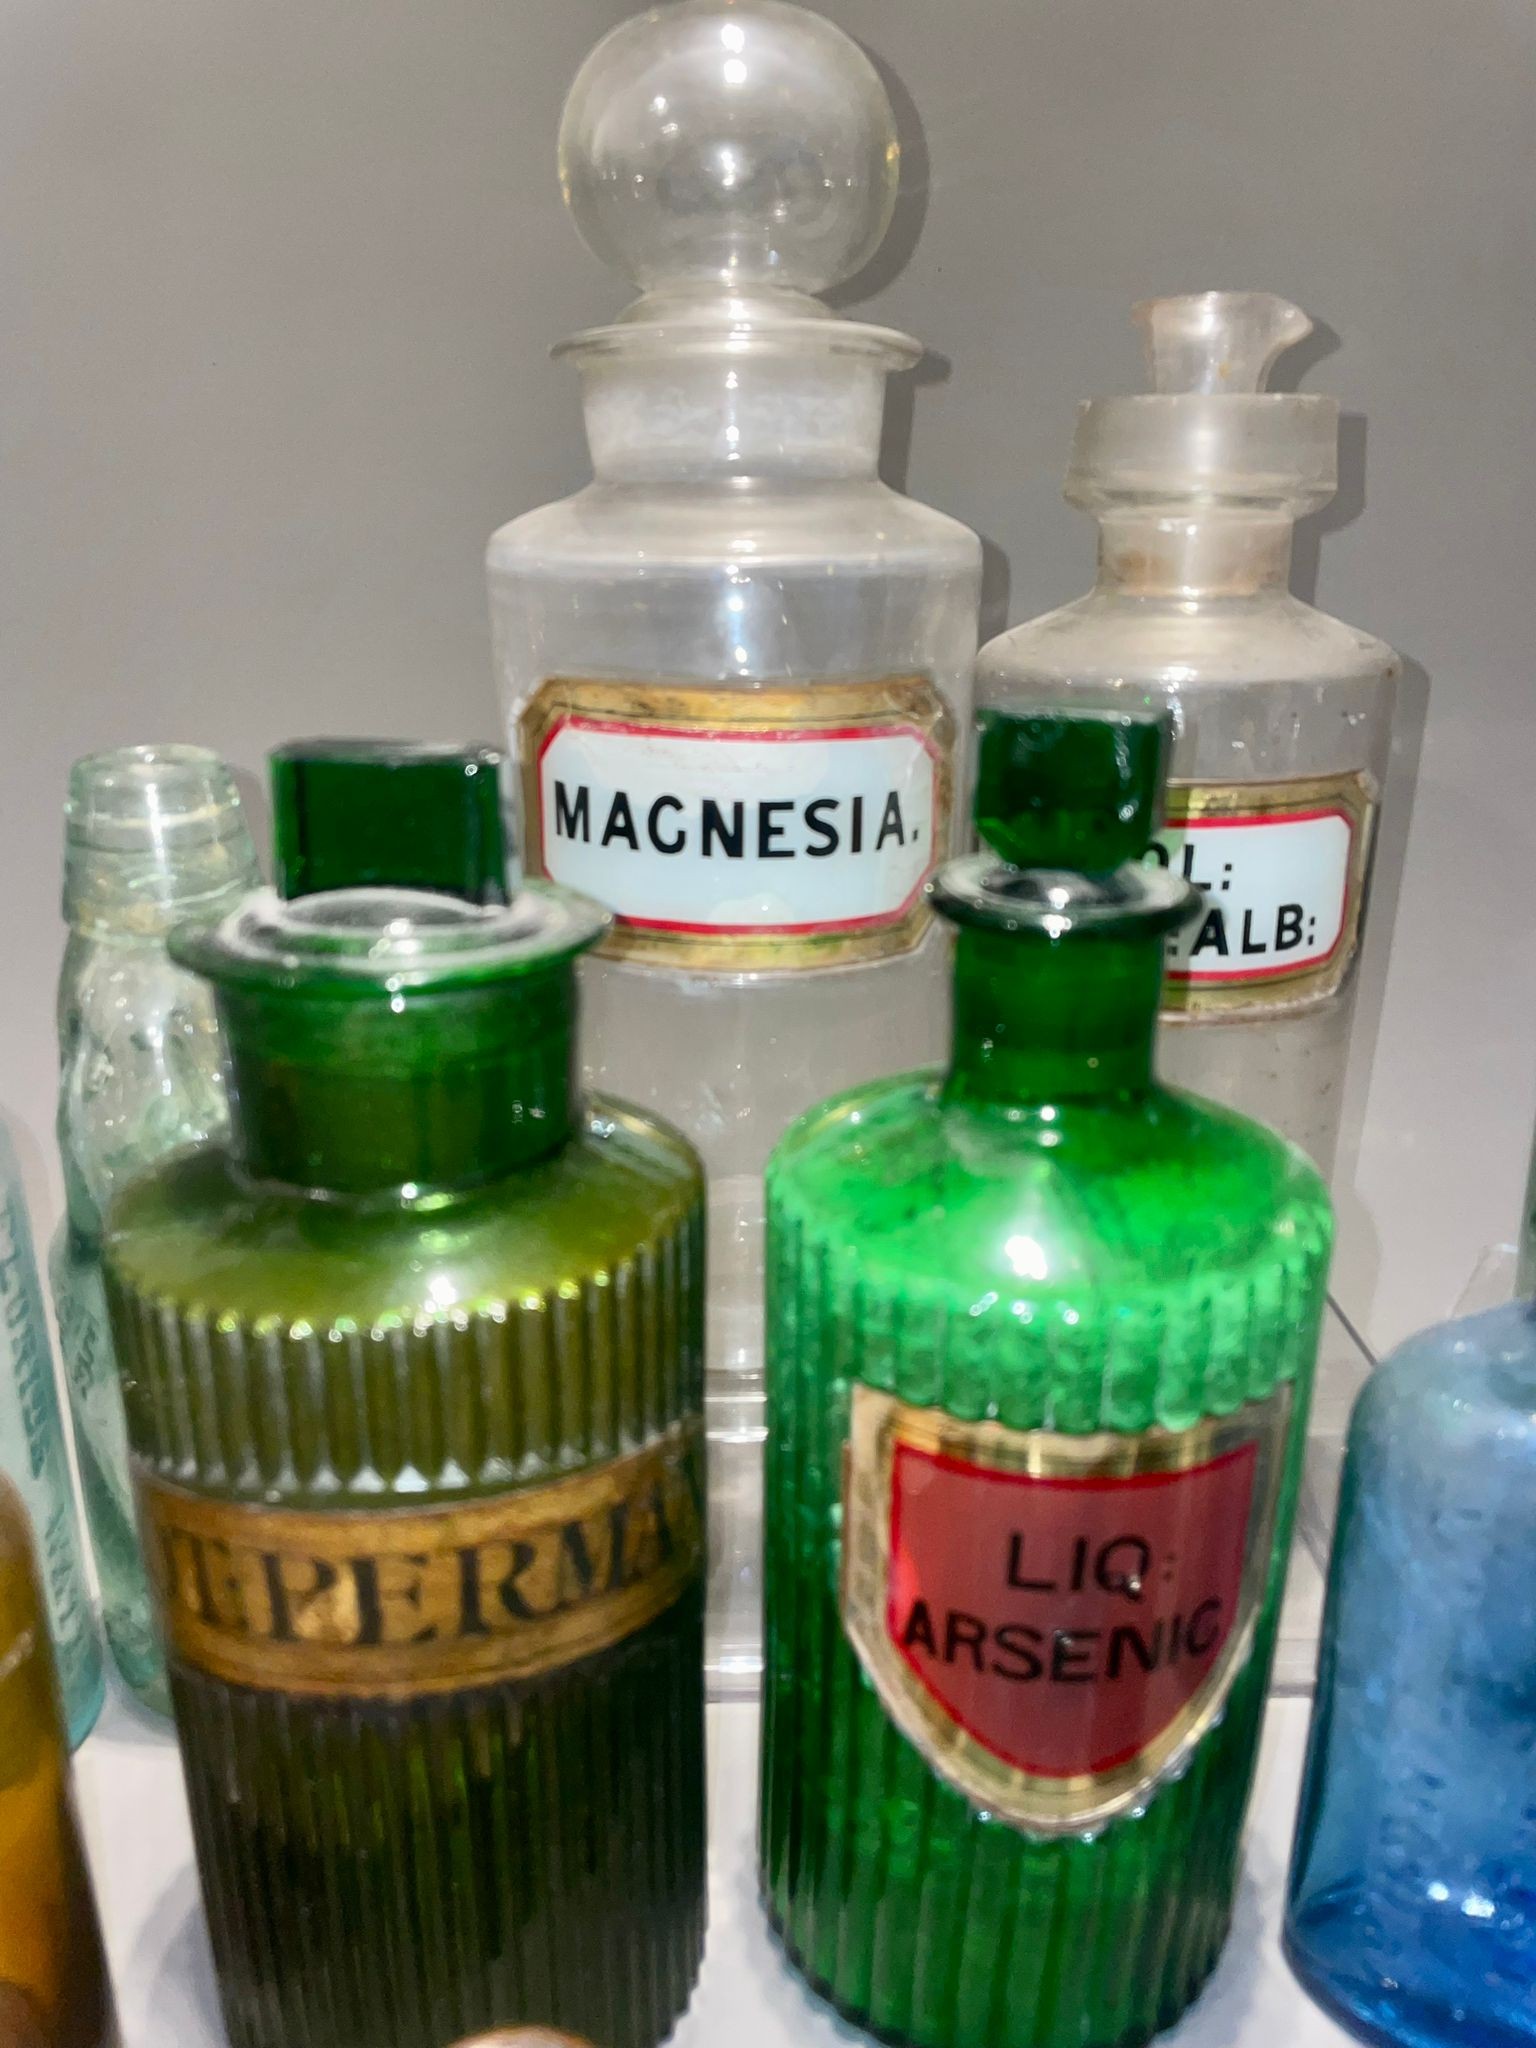 Glassware: early 20th Century bottles including Apothecary (Magnesia, OL:PET: ALB:, LIQ ARSENIC - Image 4 of 5